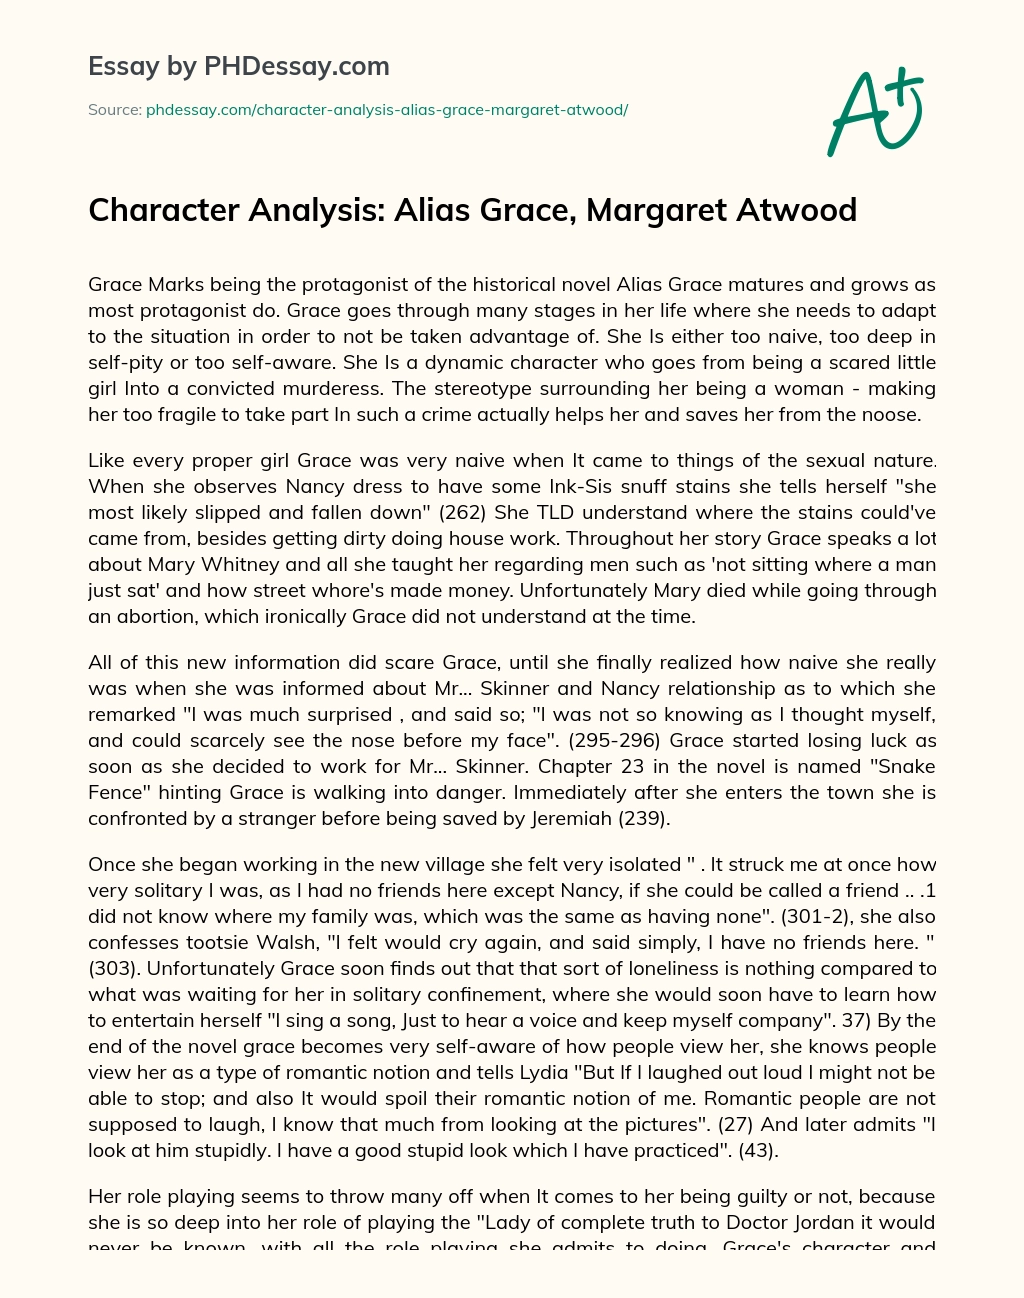 Character Analysis: Alias Grace, Margaret Atwood essay